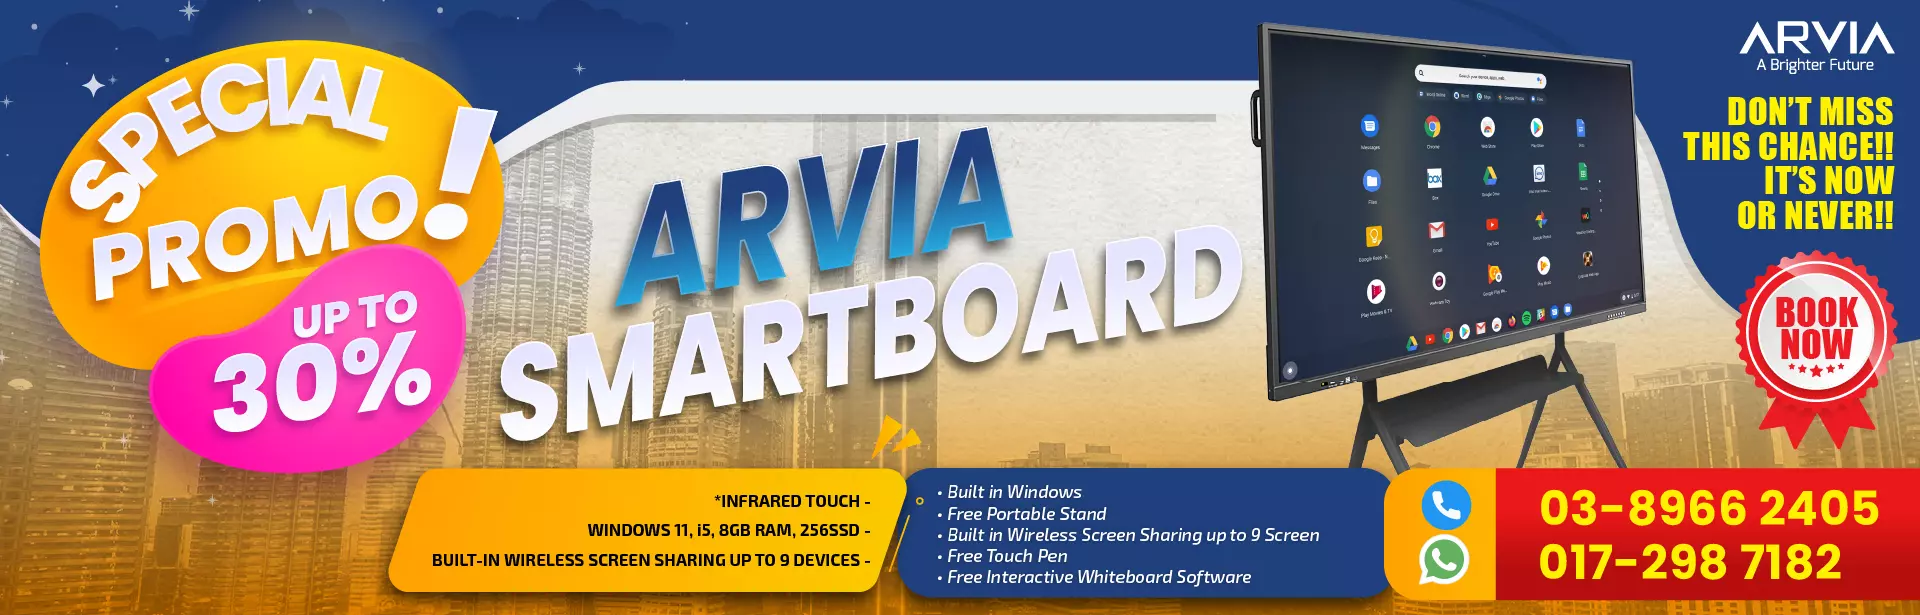 special promo arvia smartboard standard 100 new2n